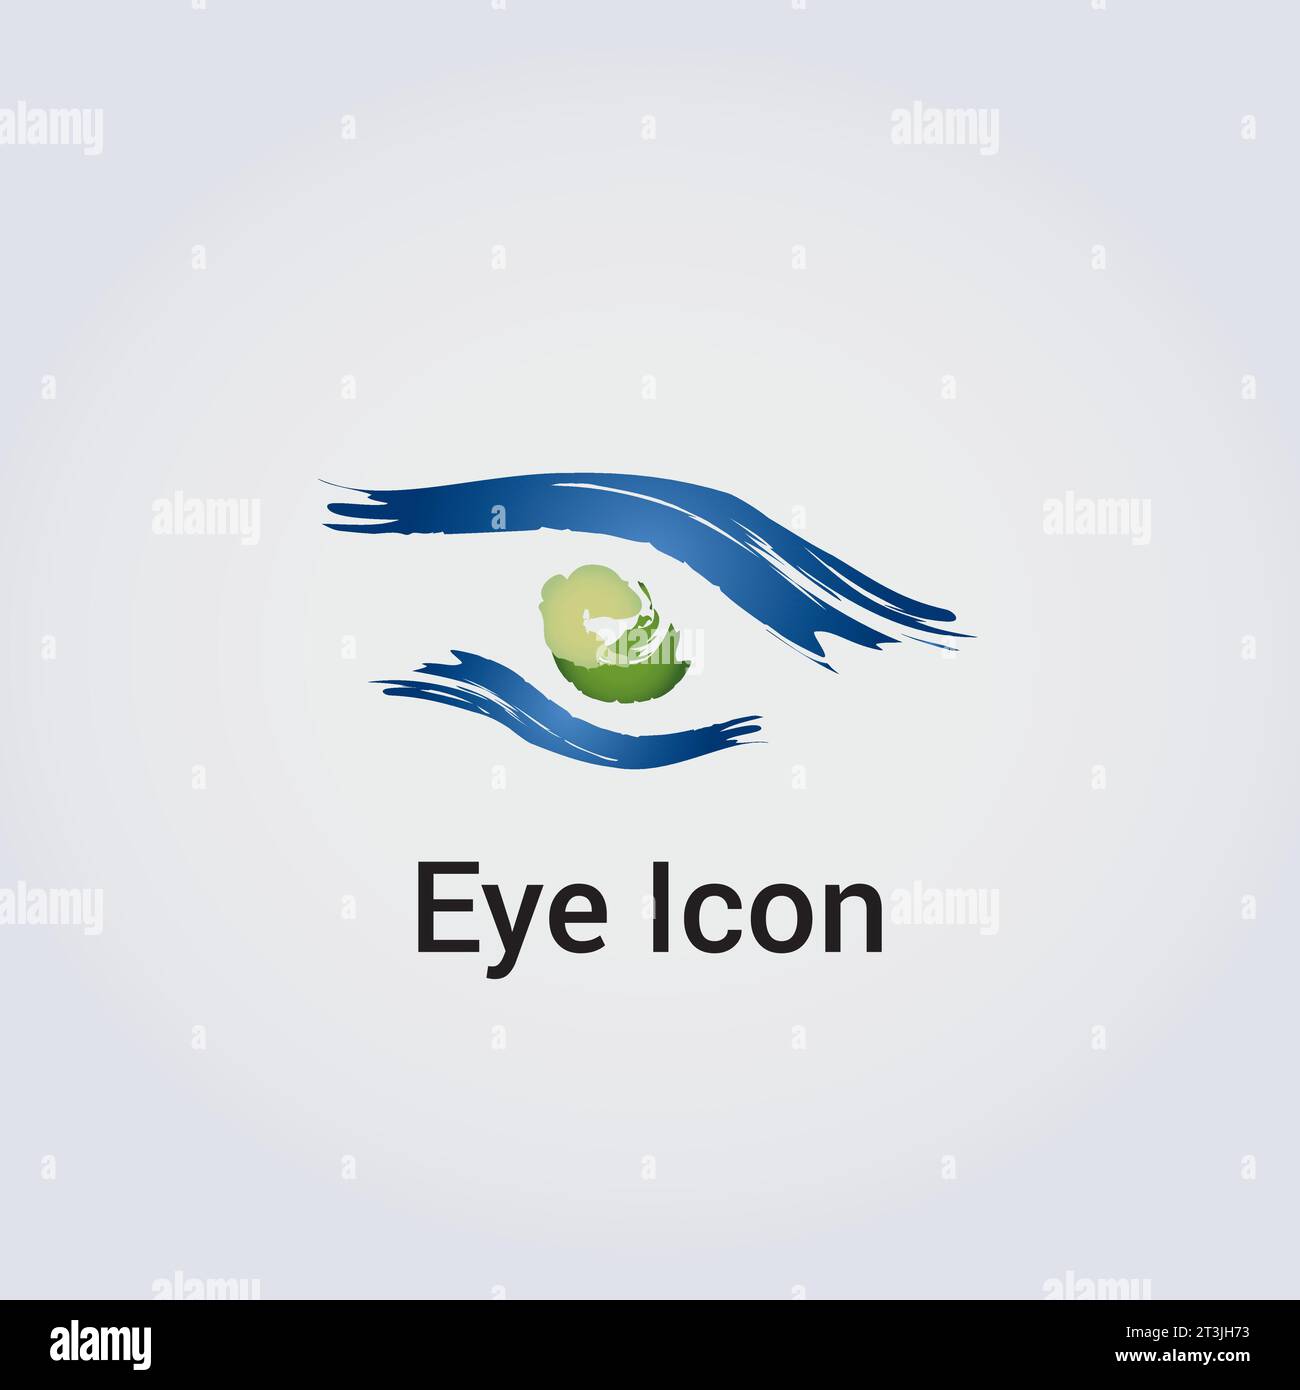 Eye Icon Logo Design - Abstract Template Various Shapes Colors Circle Wheel Beauty Emblem Symbol - Corporate Identity for Business Stock Vector